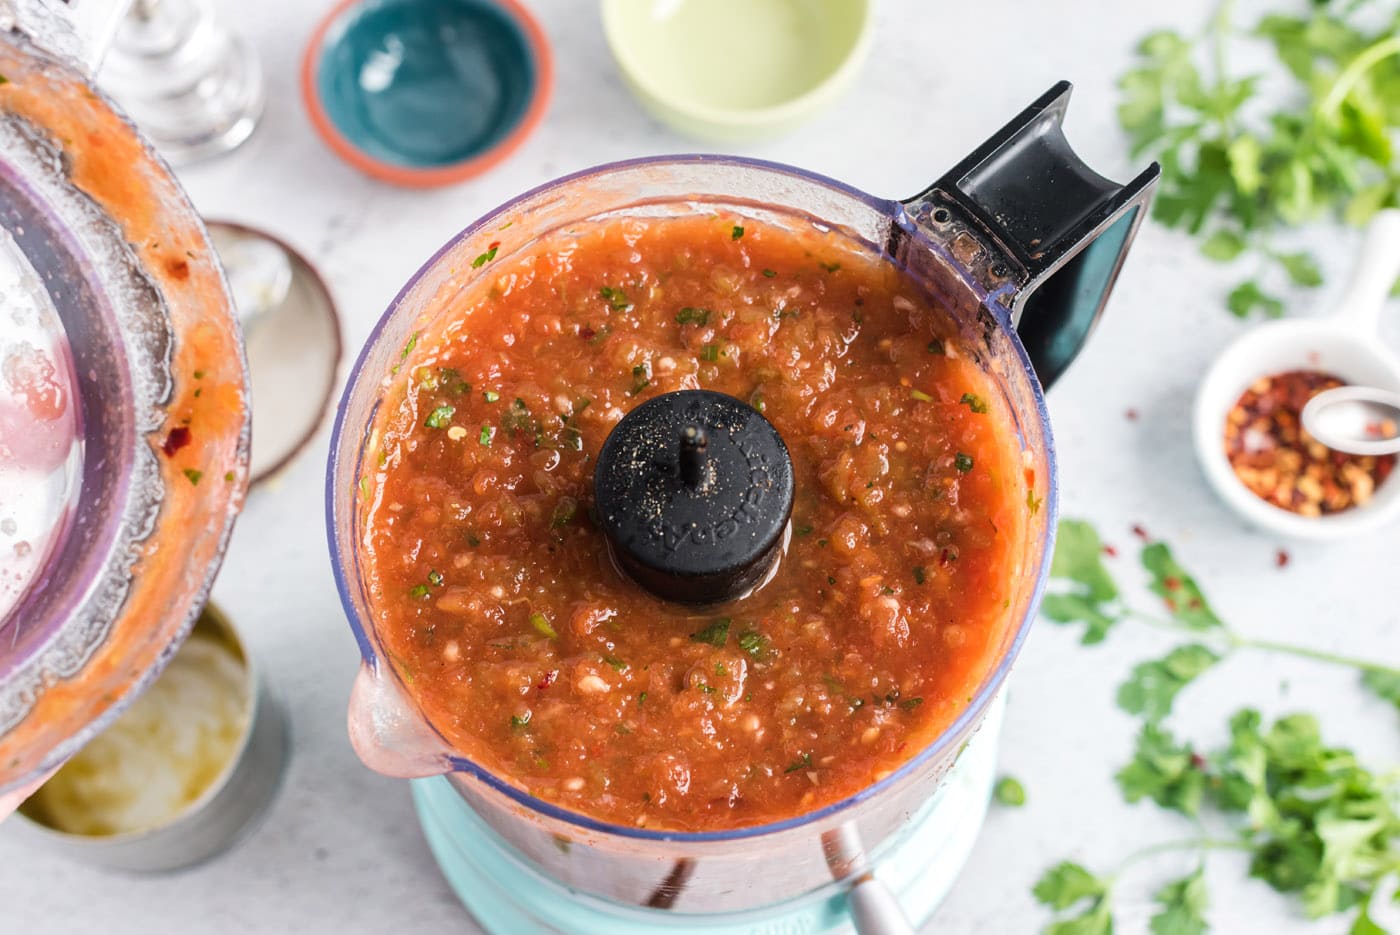 restaurant style salsa blended in a food processor